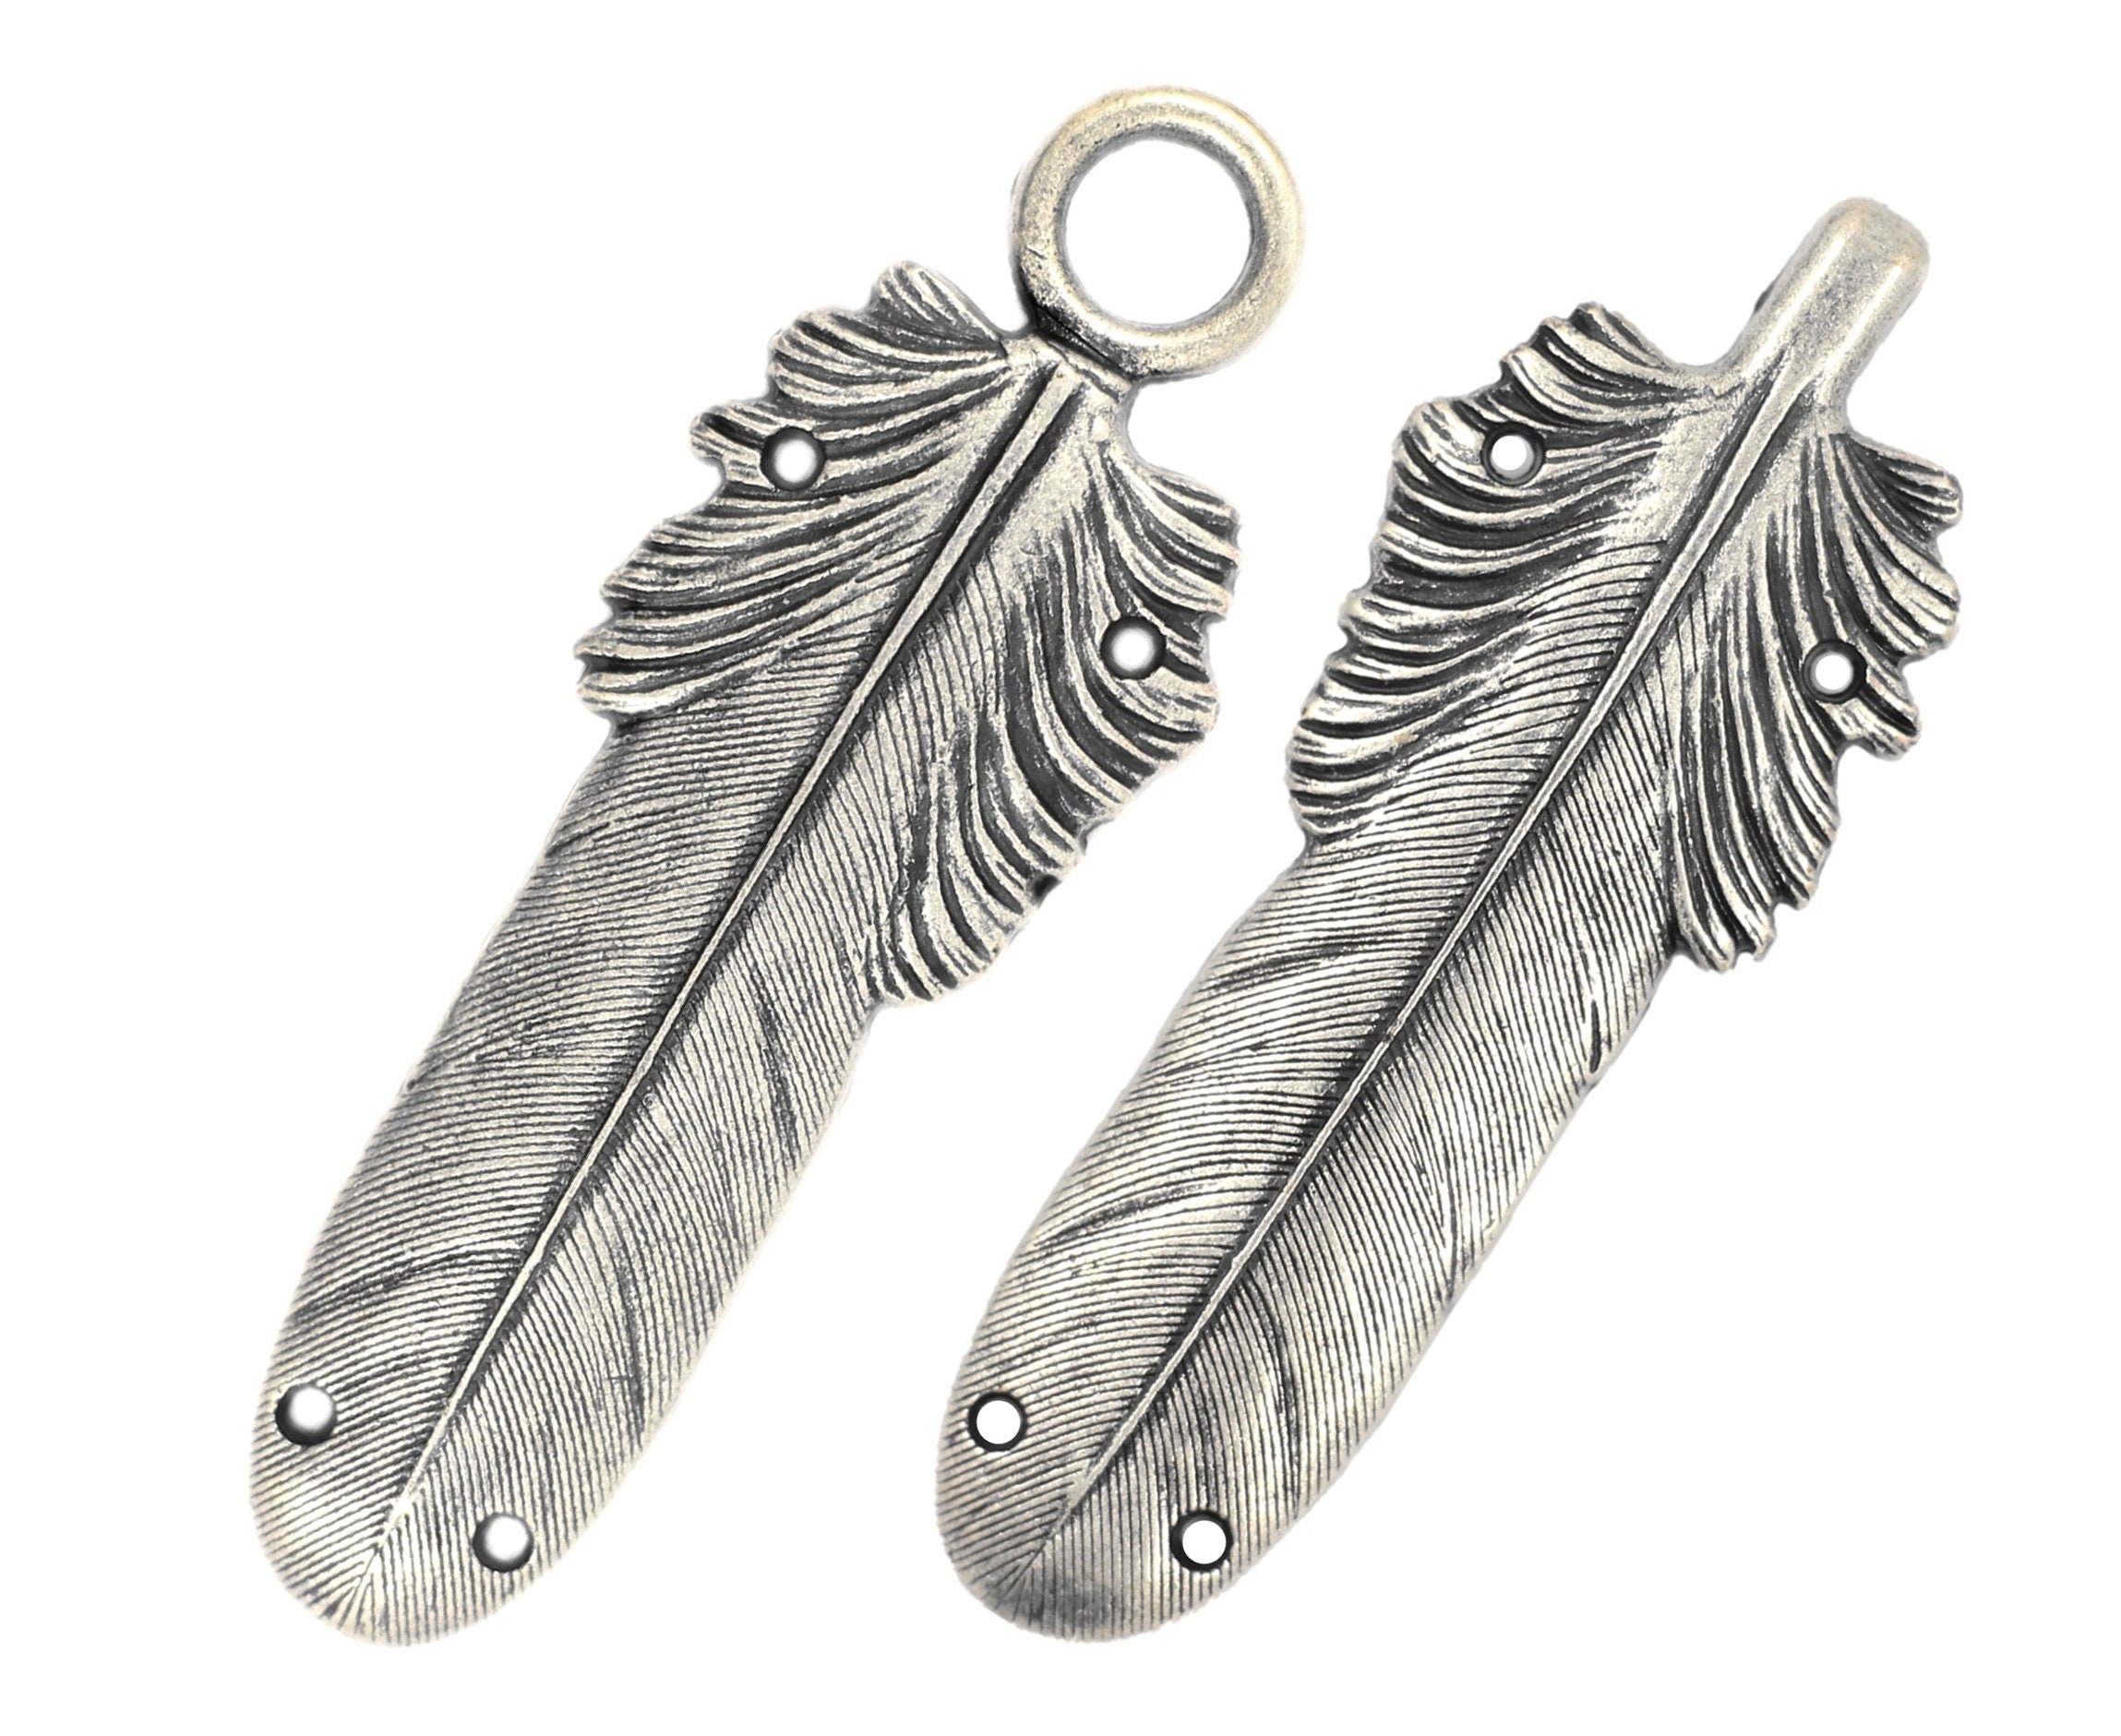 Buy Large Feather Antique Silver Cloak Clasp Metal Fasteners. One